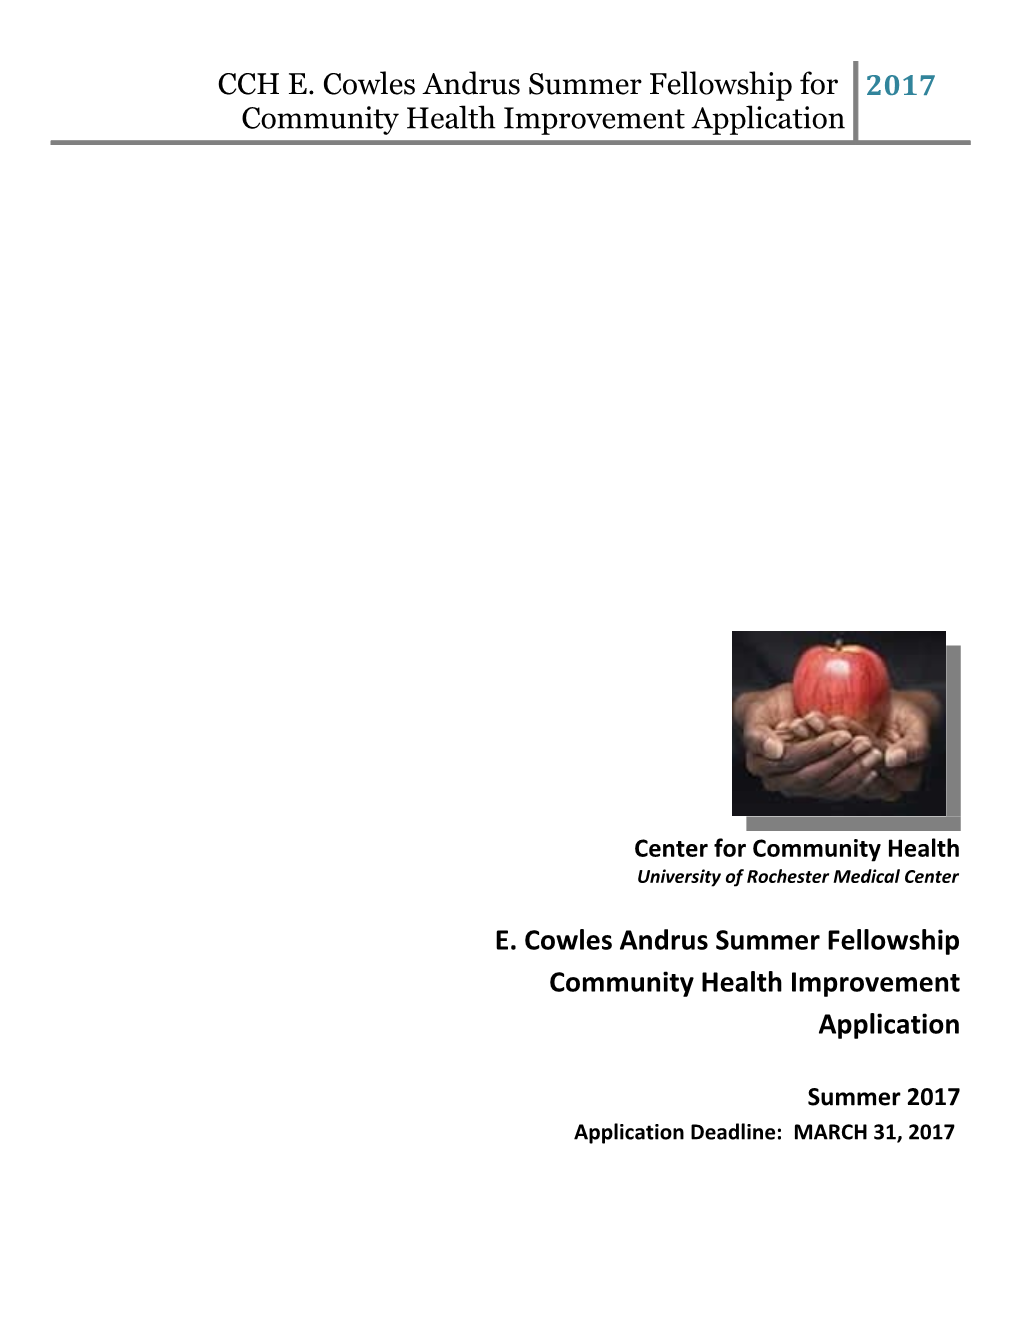 CCH E. Cowles Andrus Summer Fellowship for Community Health Improvement Application